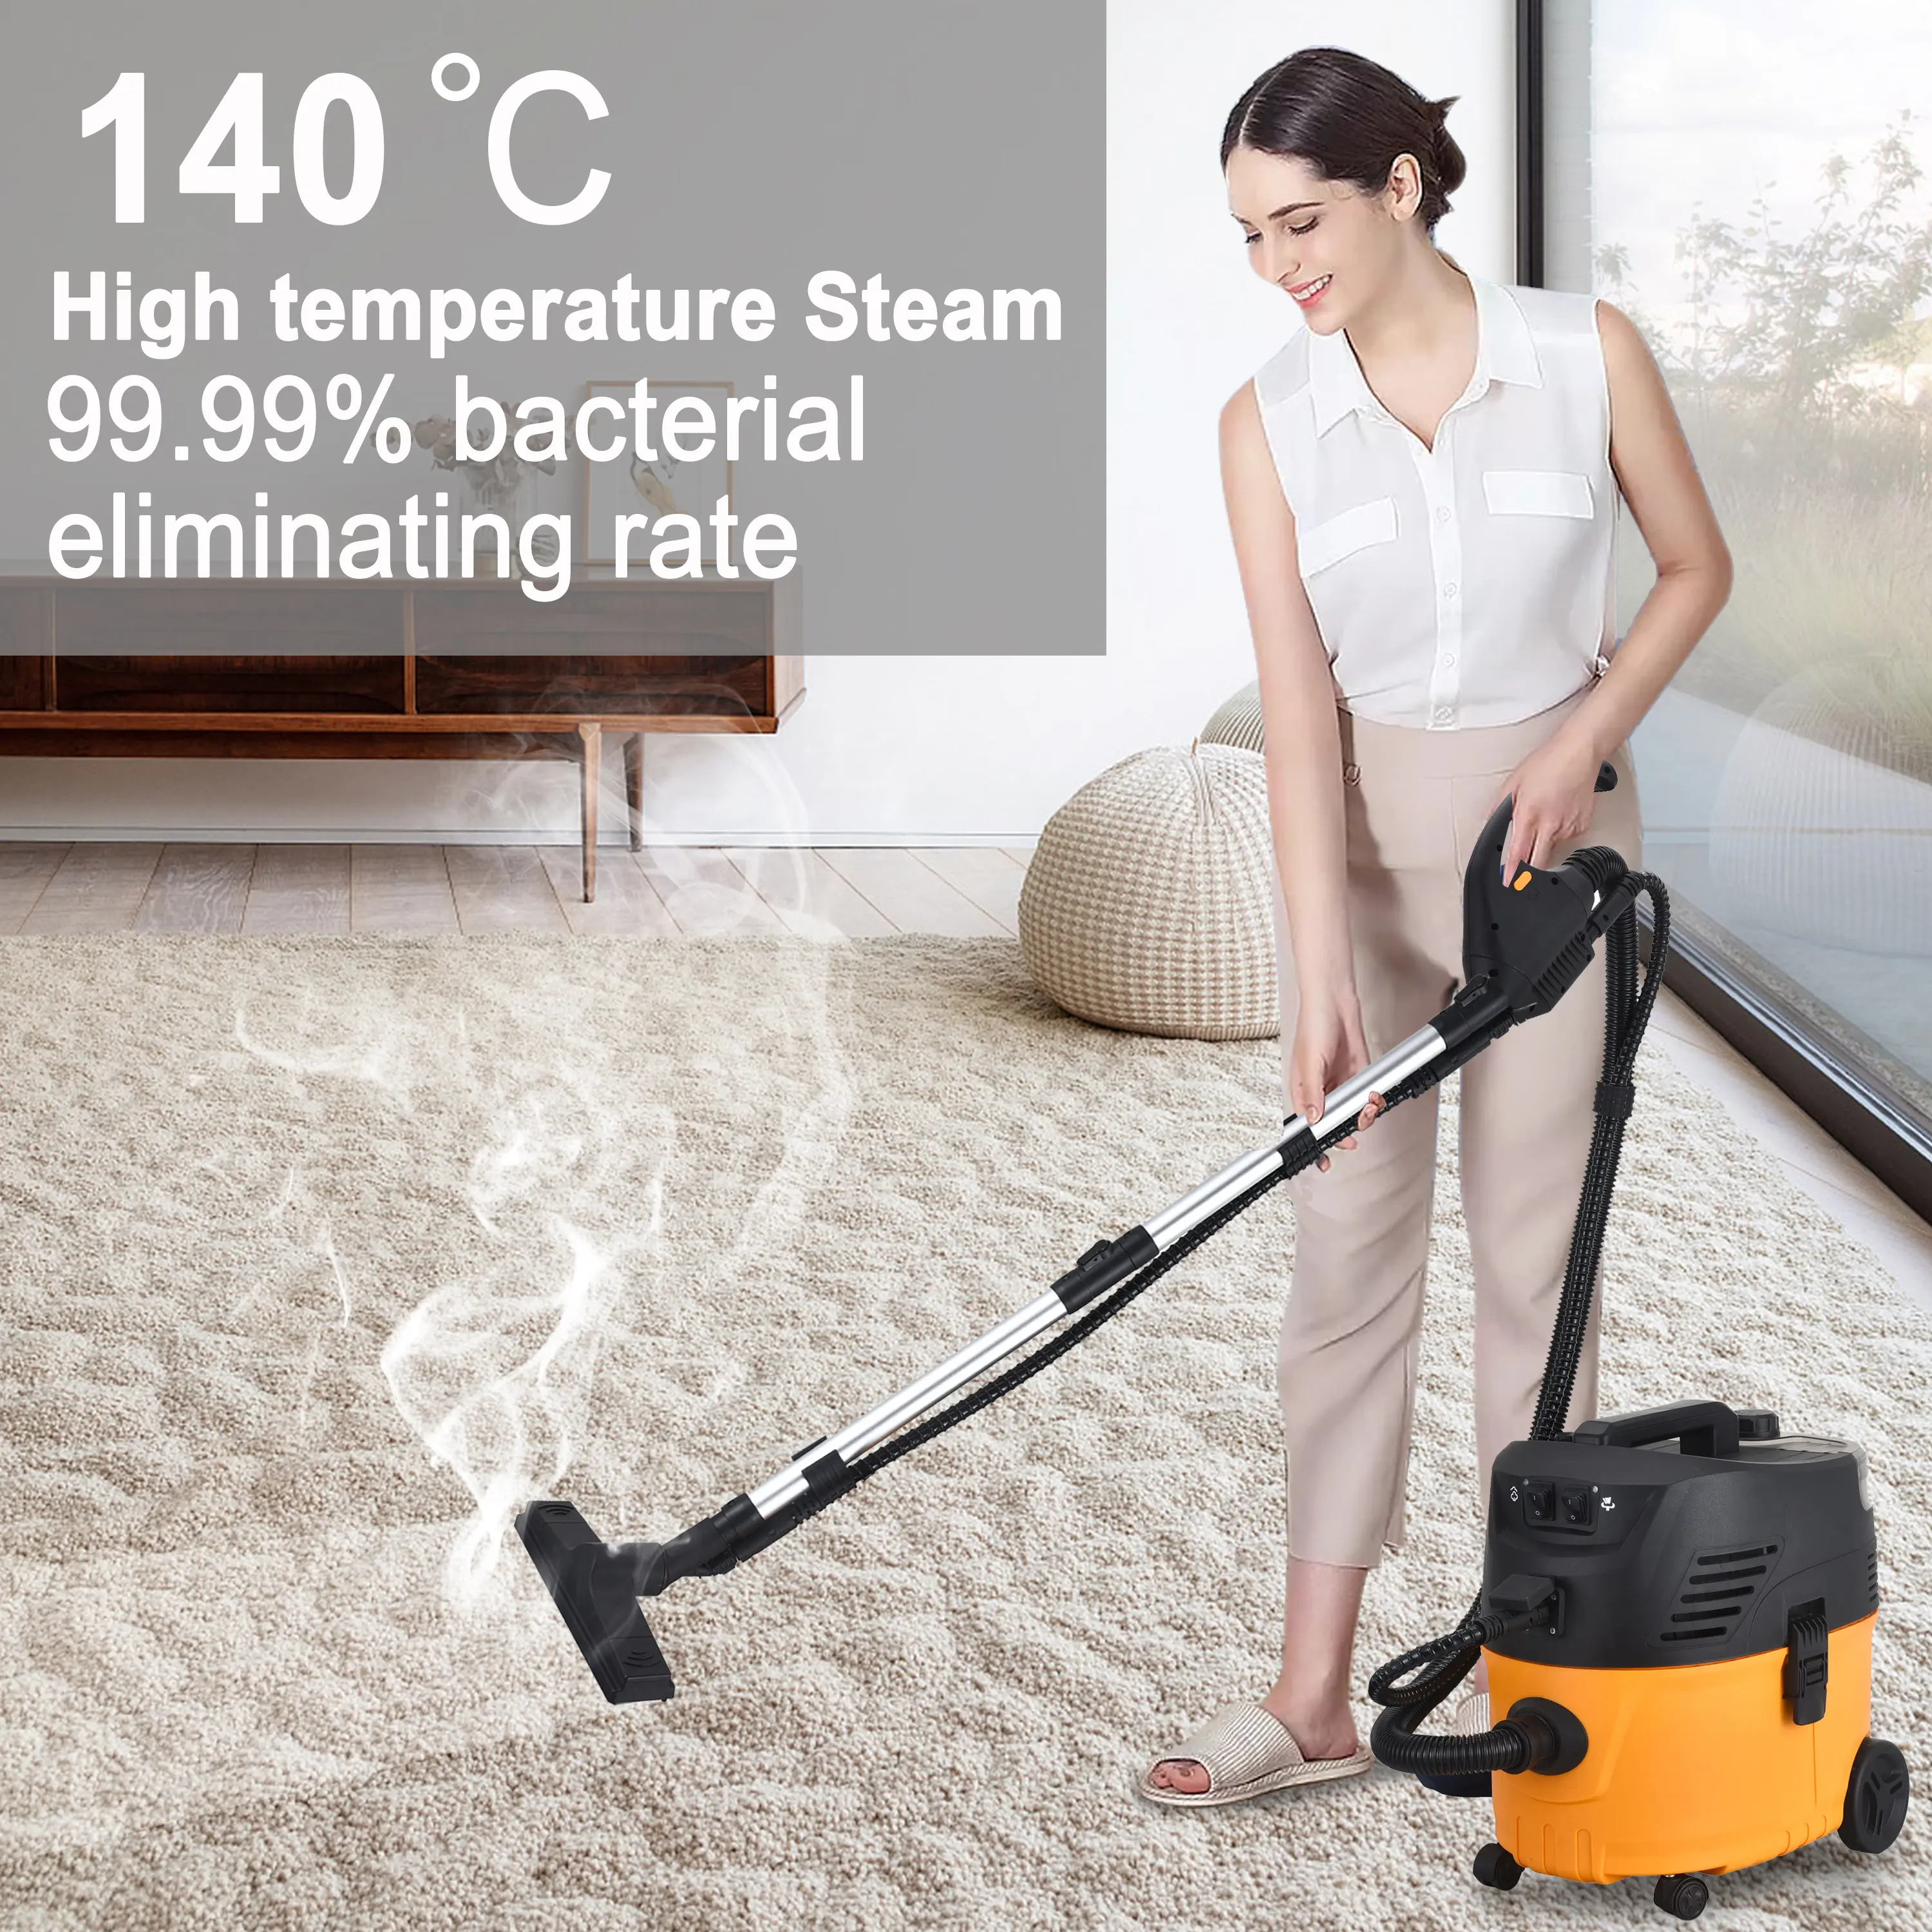 Power Steam Spray Washing Cleaning High Tempetiaras Sofa Headbandst Wet Dry Vacuum Cleaner Sofa Cleaning Self Service Car Wash